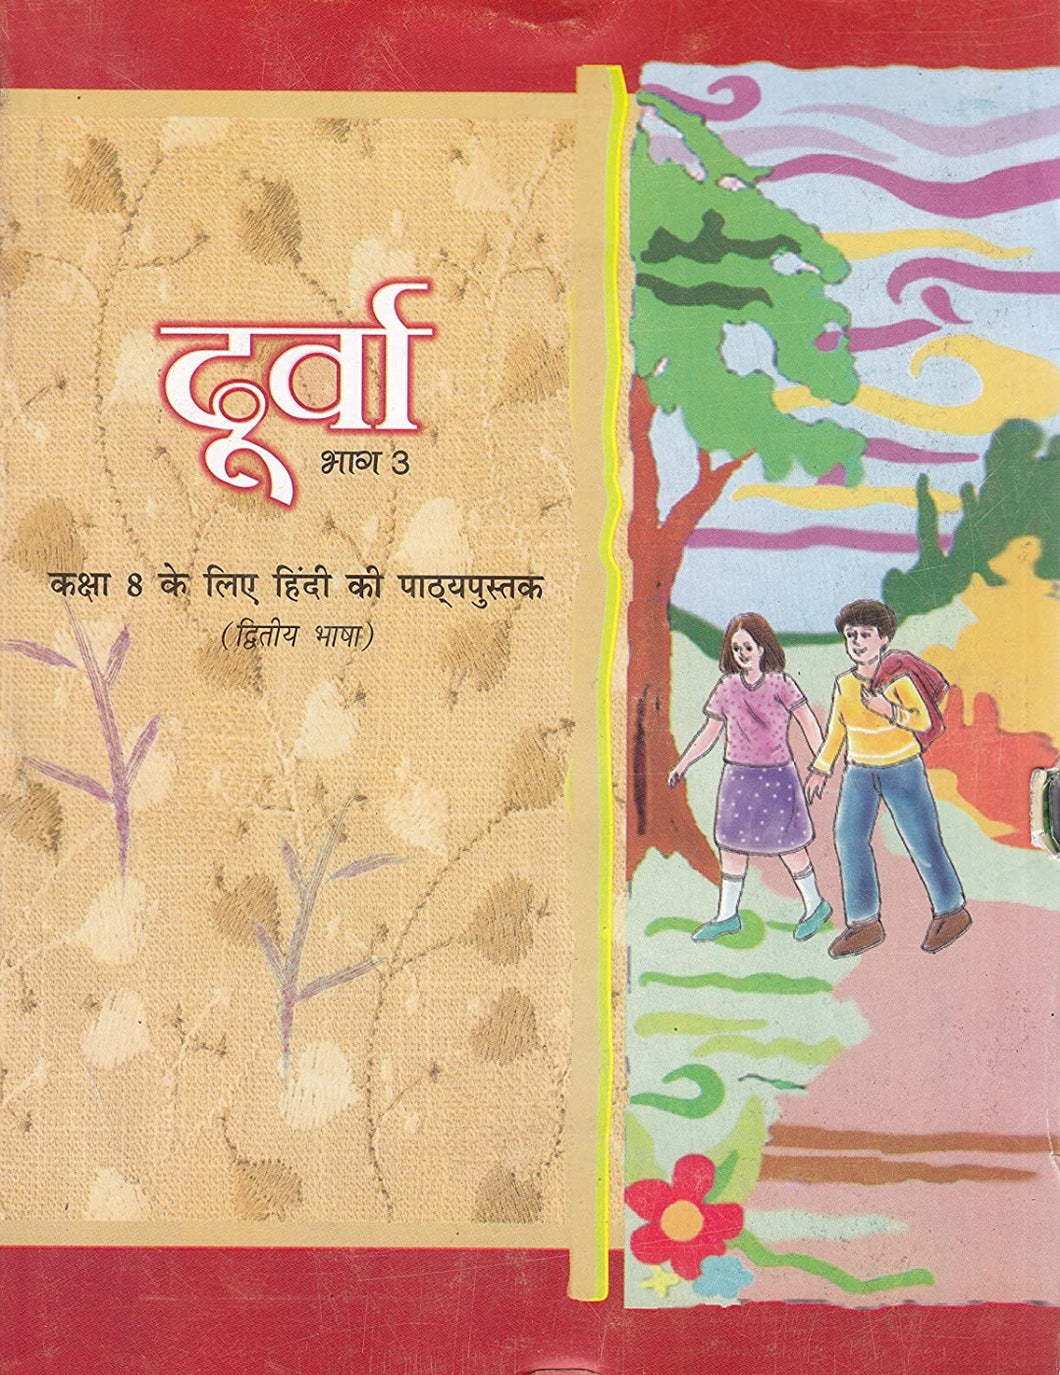 NCERT Durva - Second Language Hindi for Class 8 - latest edition as per NCERT/CBSE - Booksfy